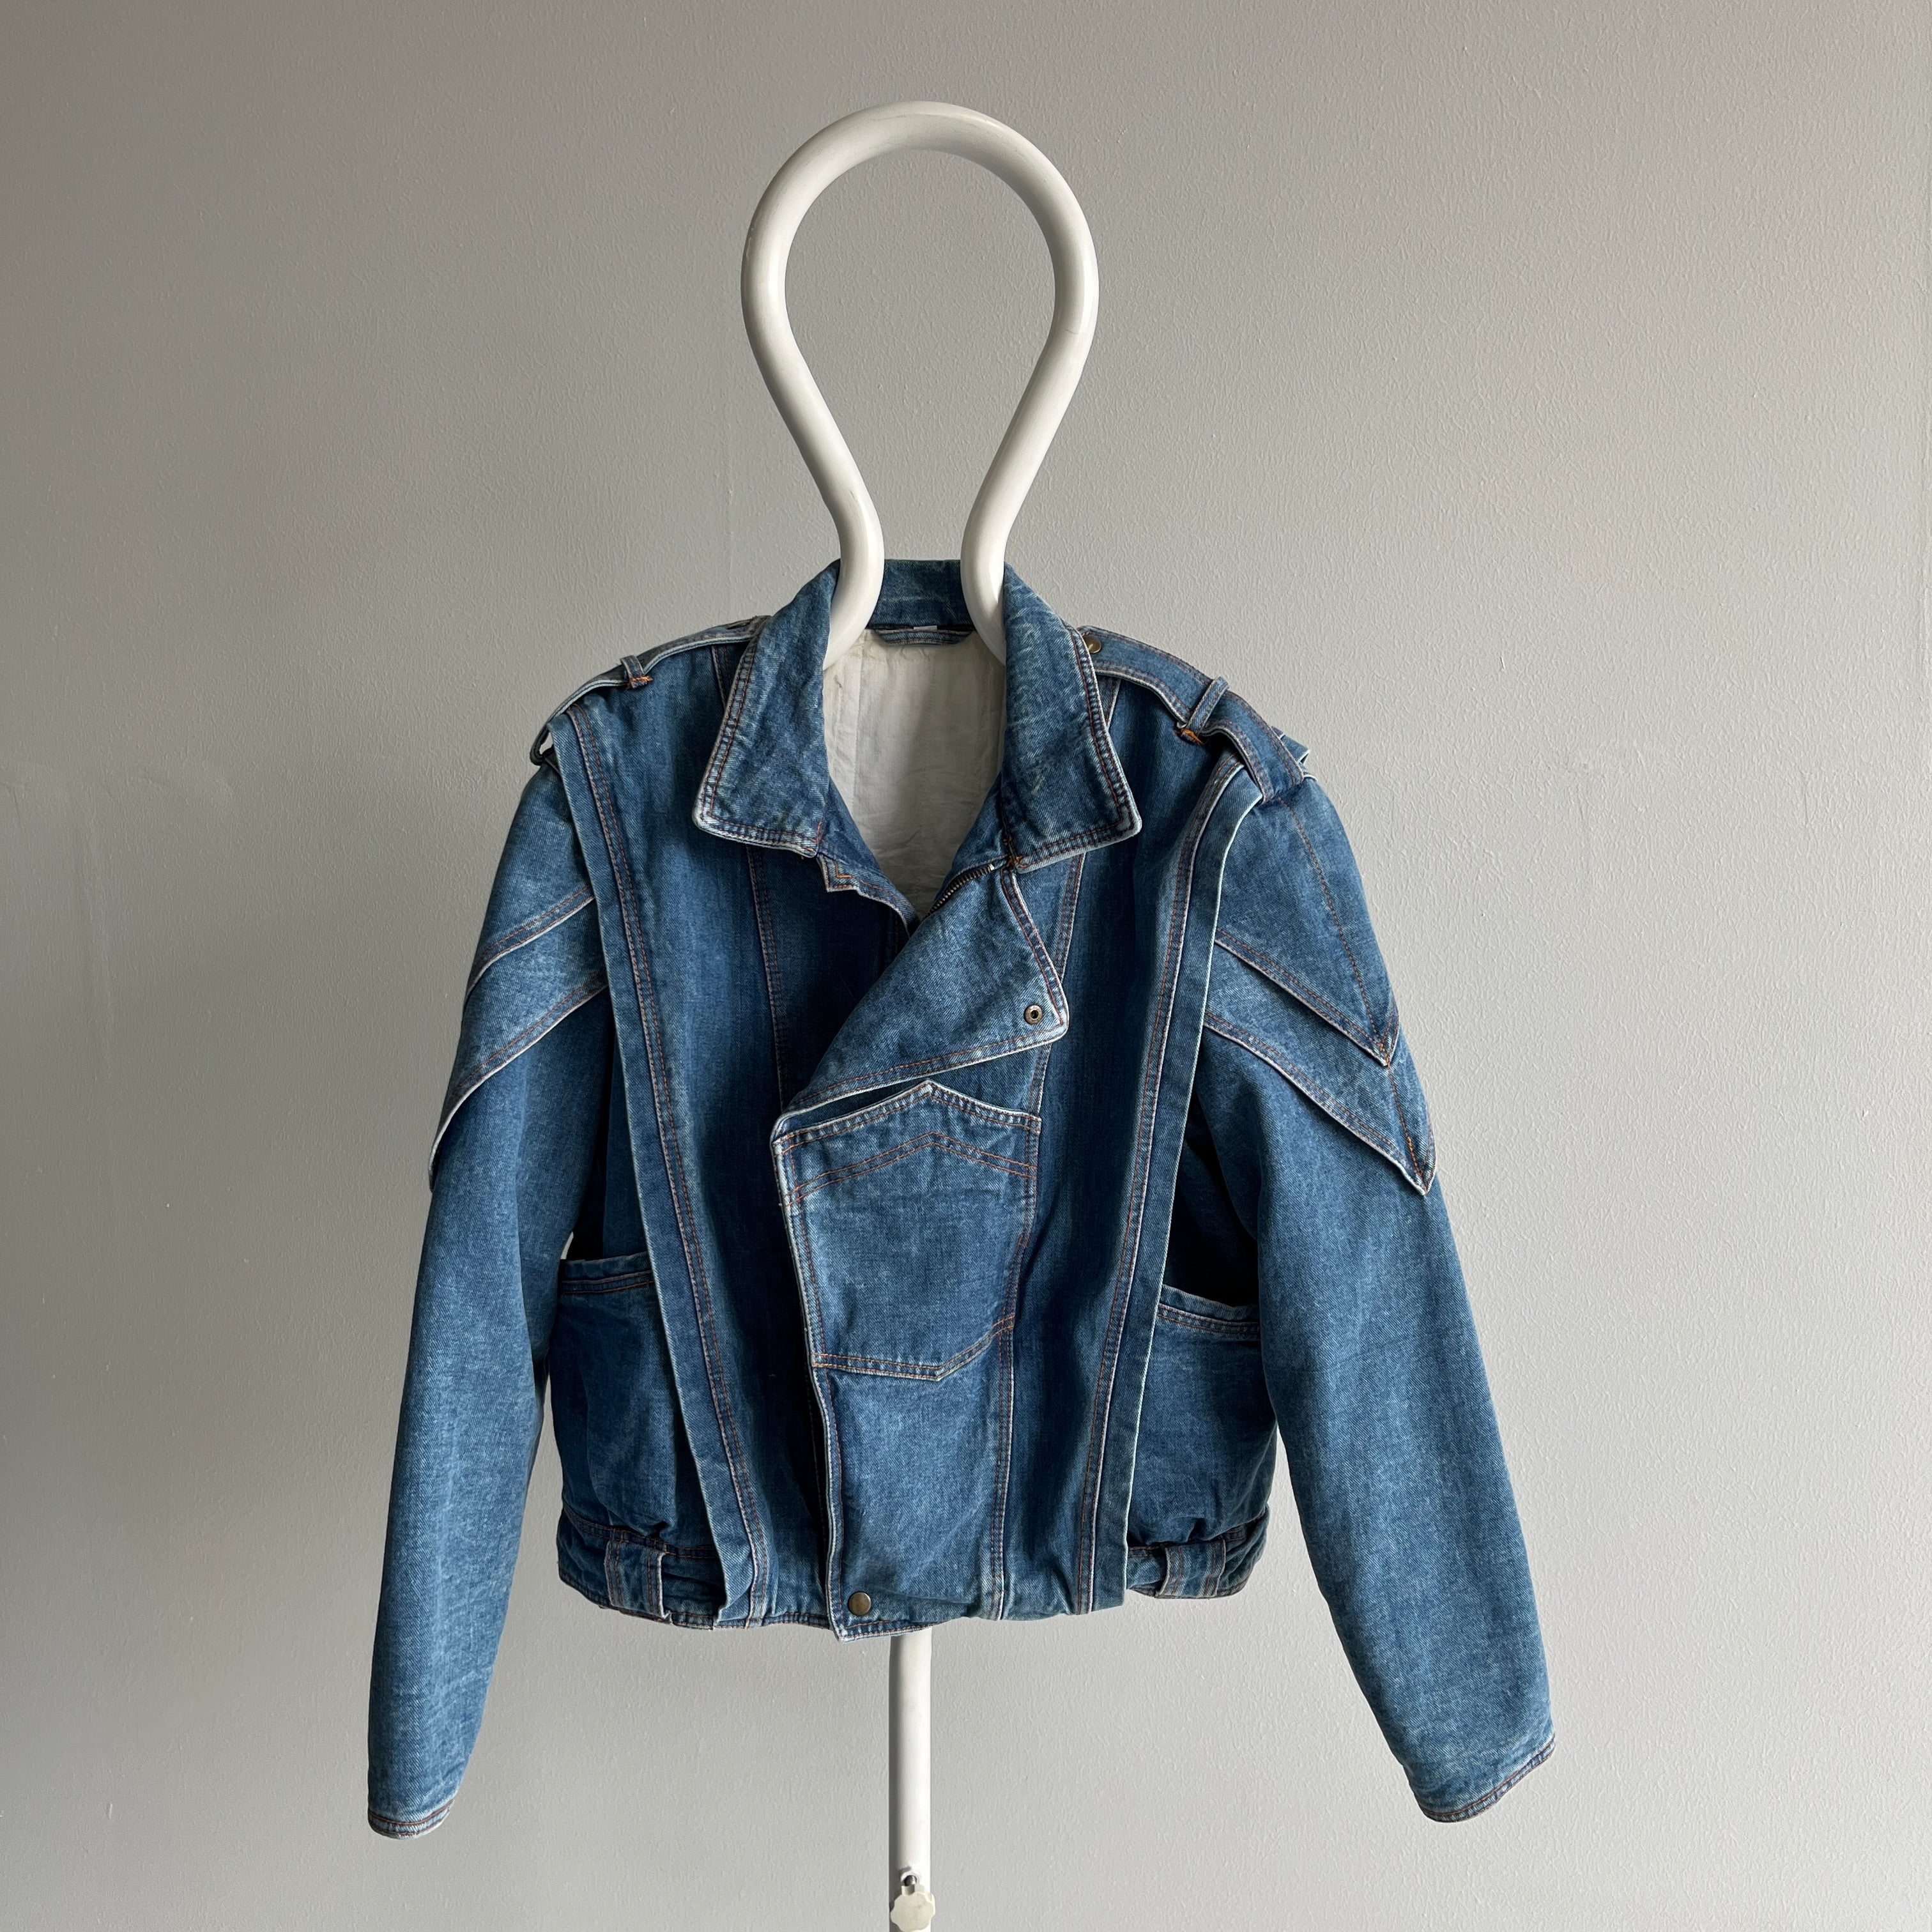 1980s EPIC!!! Thick Quilted One of a Kind Super Cool Denim Jean Jacket